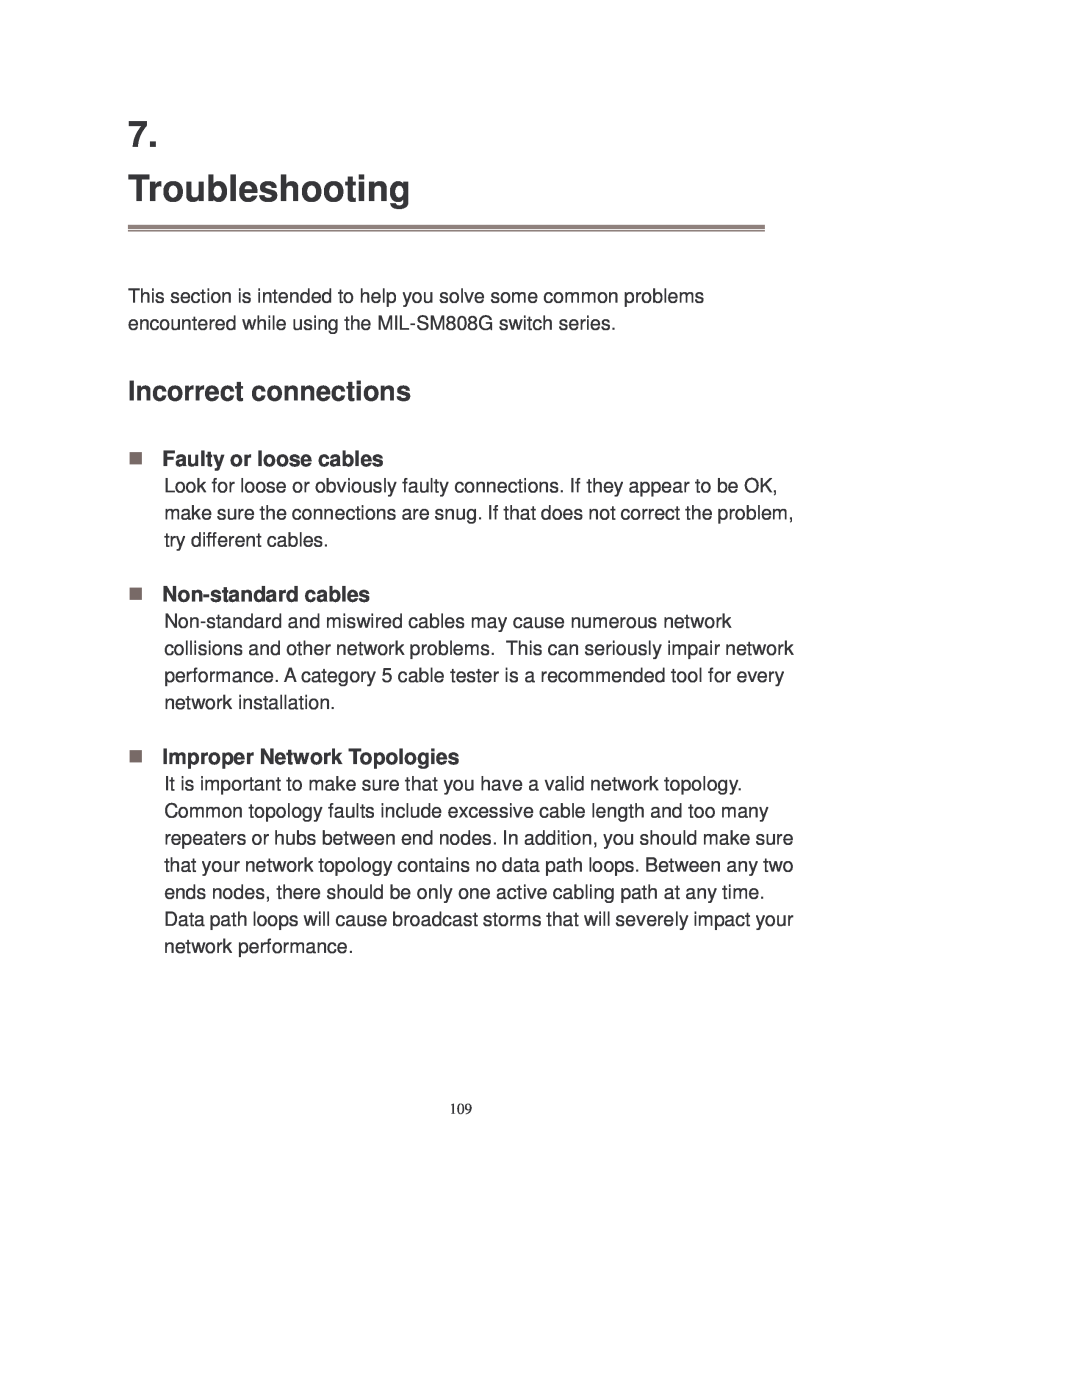 Transition Networks MIL-SM808GPXX manual Troubleshooting, Incorrect connections 